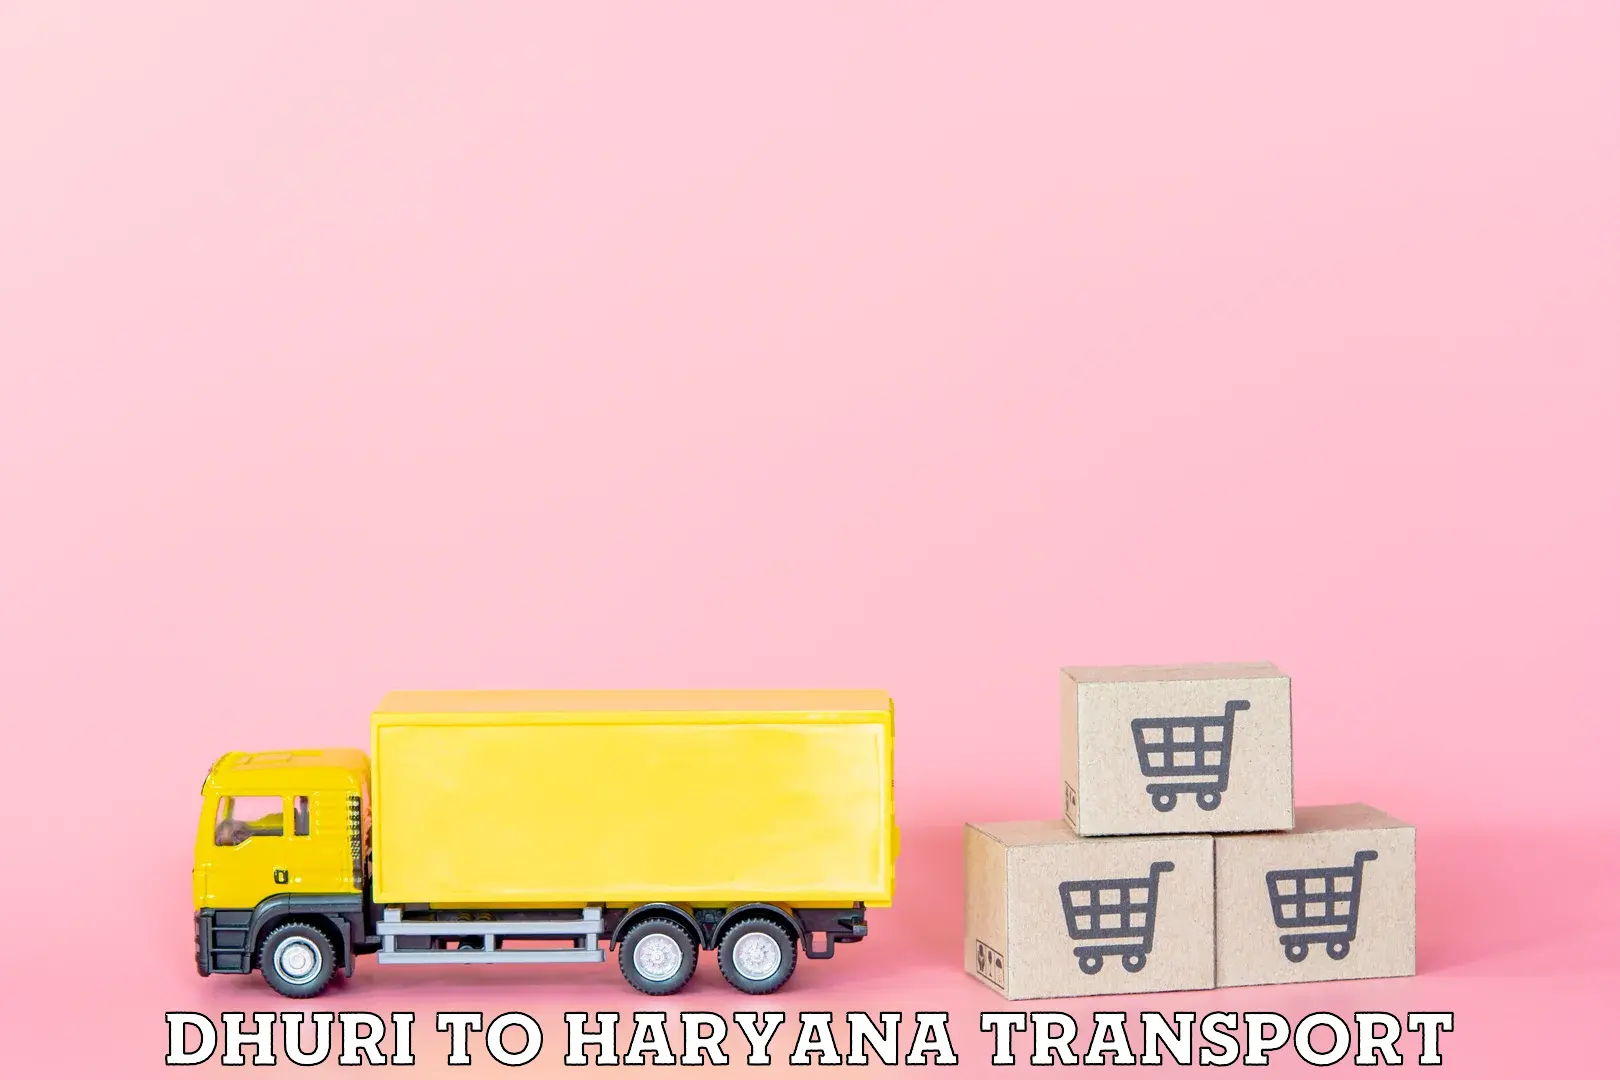 Commercial transport service Dhuri to Haryana